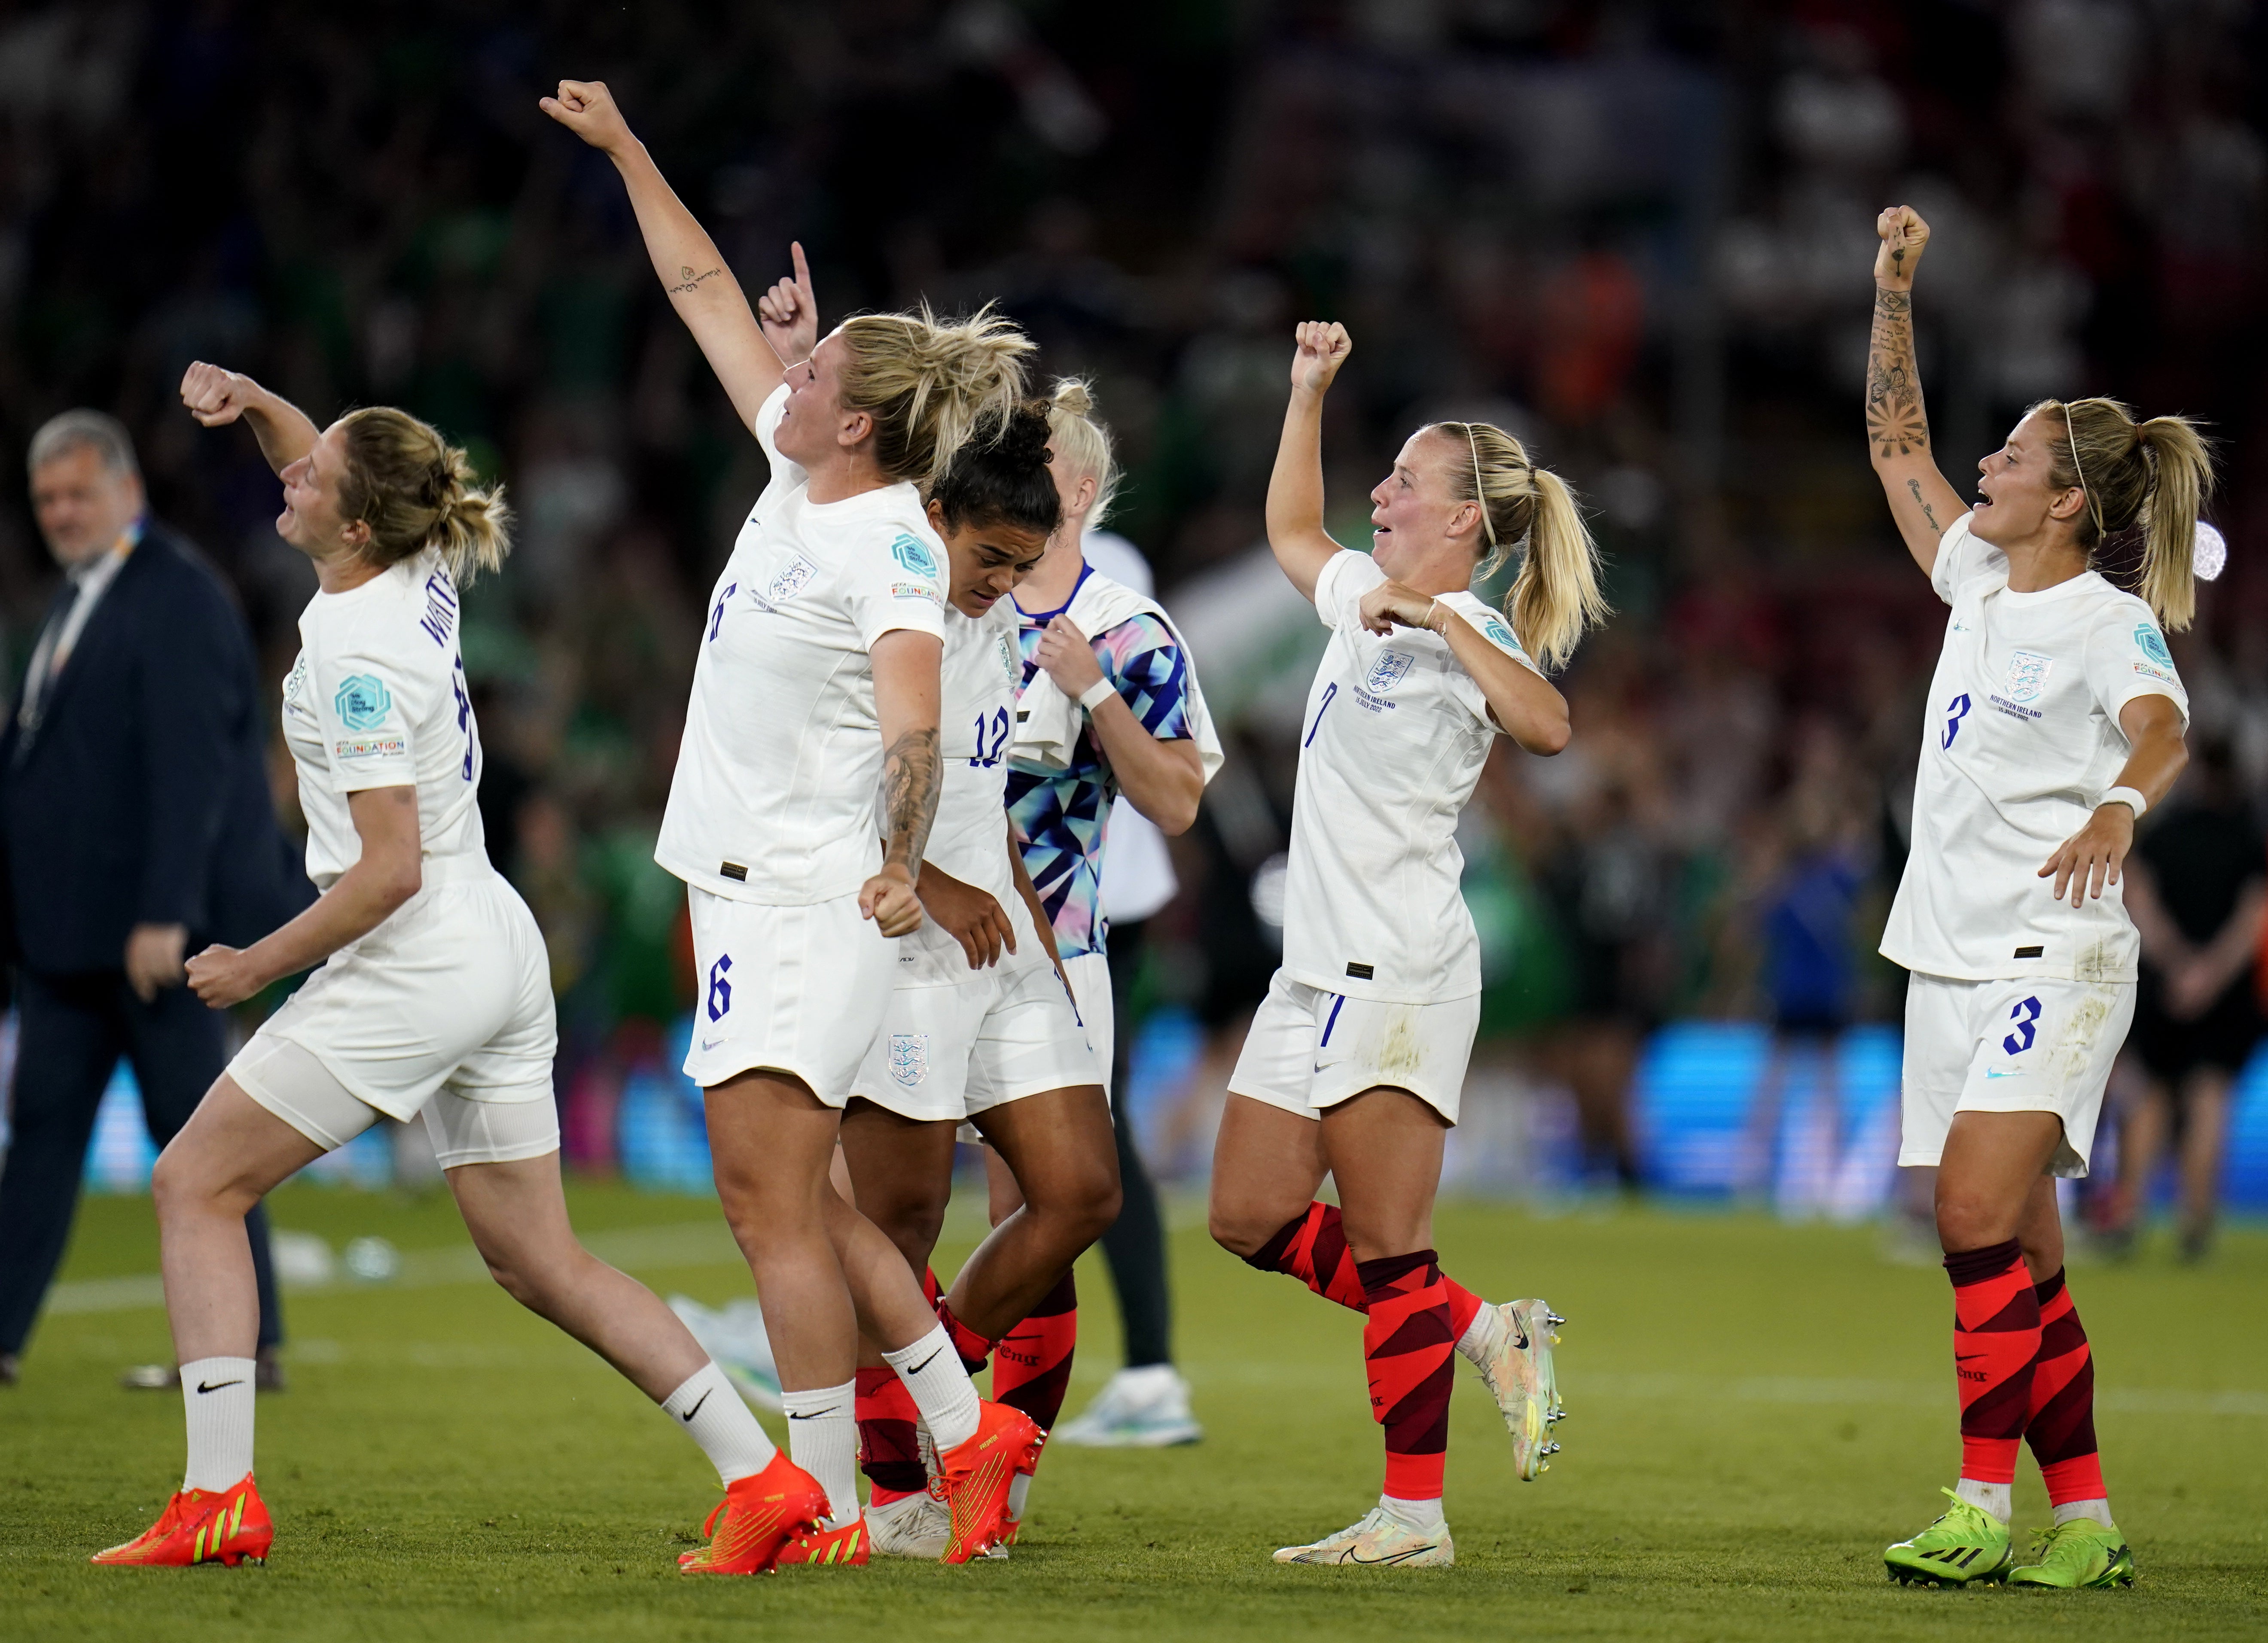 England celebrate after beating Northern Ireland 5-0 on Friday night to finish top of their group with a 100 per cent record and without conceding a goal at Euro 2022